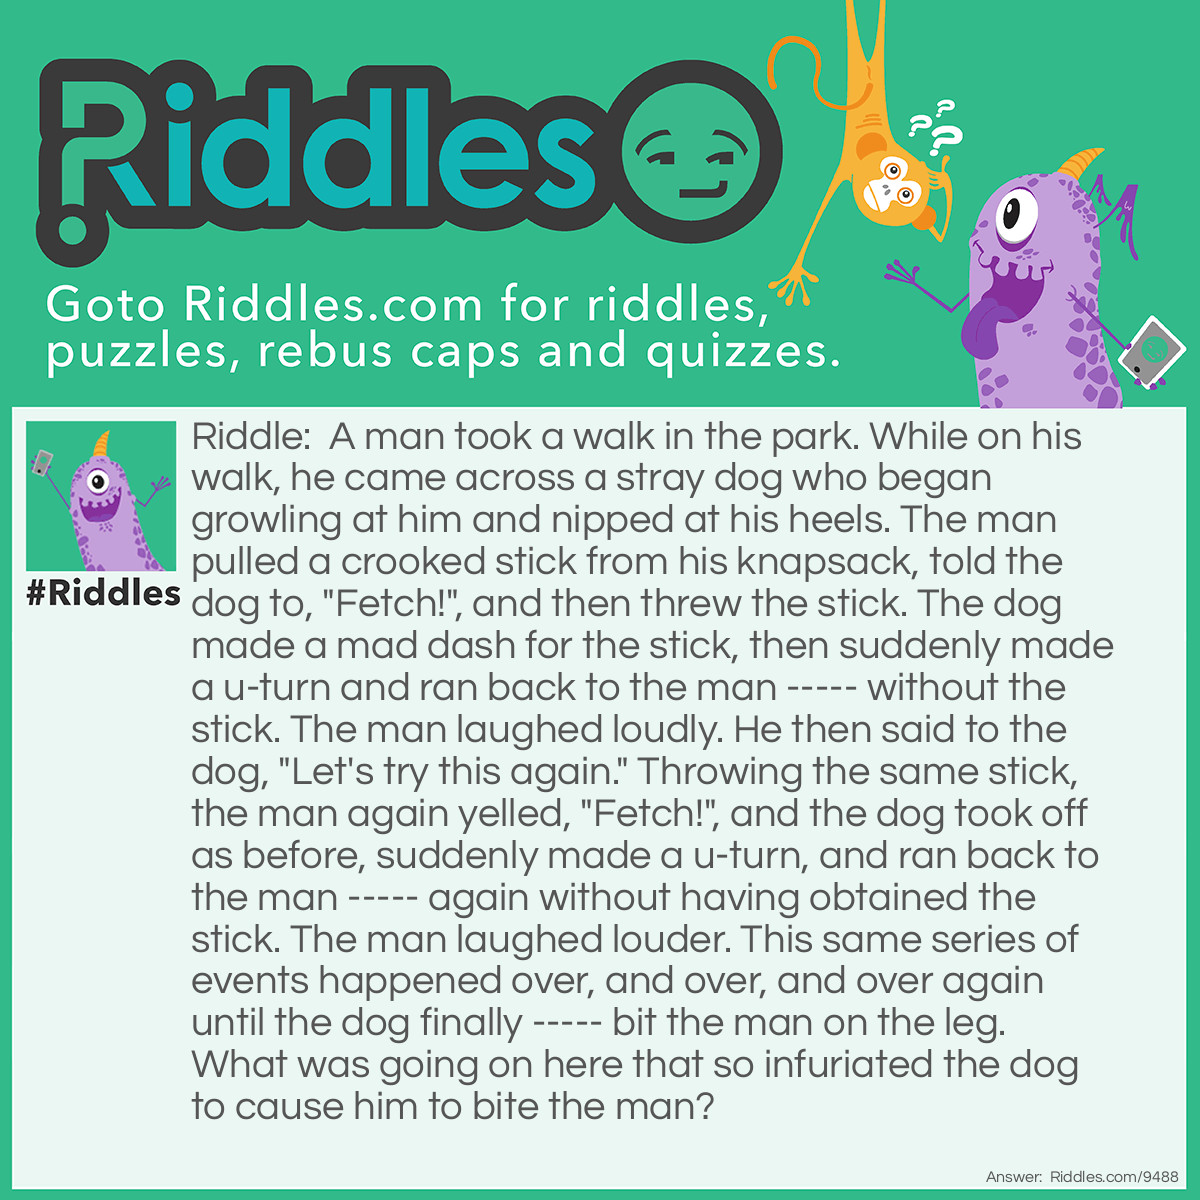 Riddle: A man took a walk in the park. While on his walk, he came across a stray dog who began growling at him and nipped at his heels. The man pulled a crooked stick from his knapsack, told the dog to, "Fetch!", and then threw the stick. The dog made a mad dash for the stick, then suddenly made a u-turn and ran back to the man ----- without the stick. The man laughed loudly. He then said to the dog, "Let's try this again." Throwing the same stick, the man again yelled, "Fetch!", and the dog took off as before, suddenly made a u-turn, and ran back to the man ----- again without having obtained the stick. The man laughed louder. This same series of events happened over, and over, and over again until the dog finally ----- bit the man on the leg. What was going on here that so infuriated the dog to cause him to bite the man? Answer: The man had tormented the dog in the park in the past by telling the dog to fetch the crooked stick (wooden boomerang) he carried with him in his knapsack. The dog could never catch the boomerang, which always returned to the man after he threw it, thus frustrating the dog who only wanted to play. What goes around comes around, as they say, with boomerangs and in life.